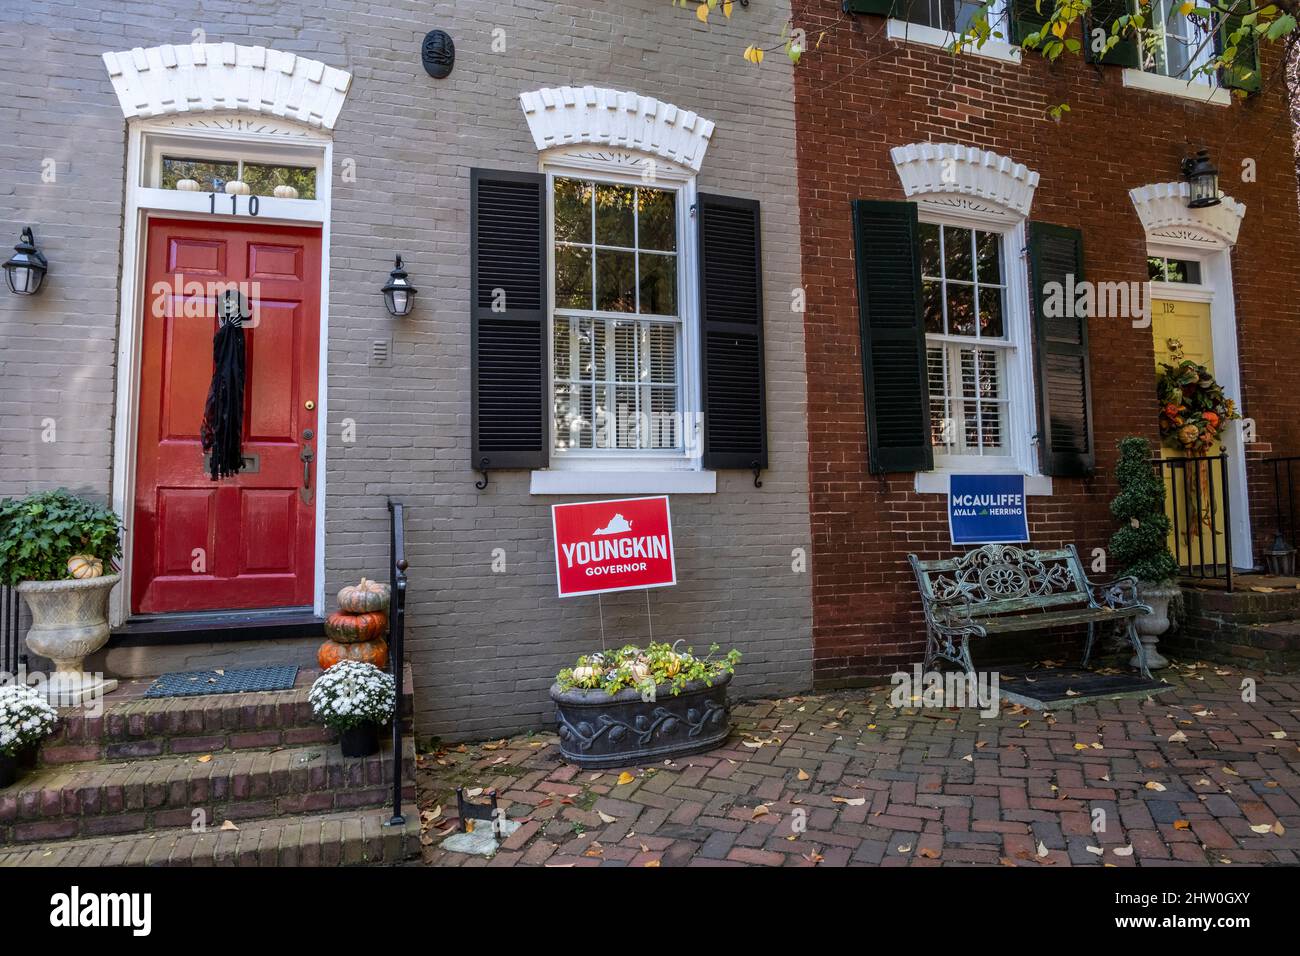 Old Town, Alexandria, Virginia. Halloween Decorations and Opposing Political Candidates' Election Posters. Stock Photo